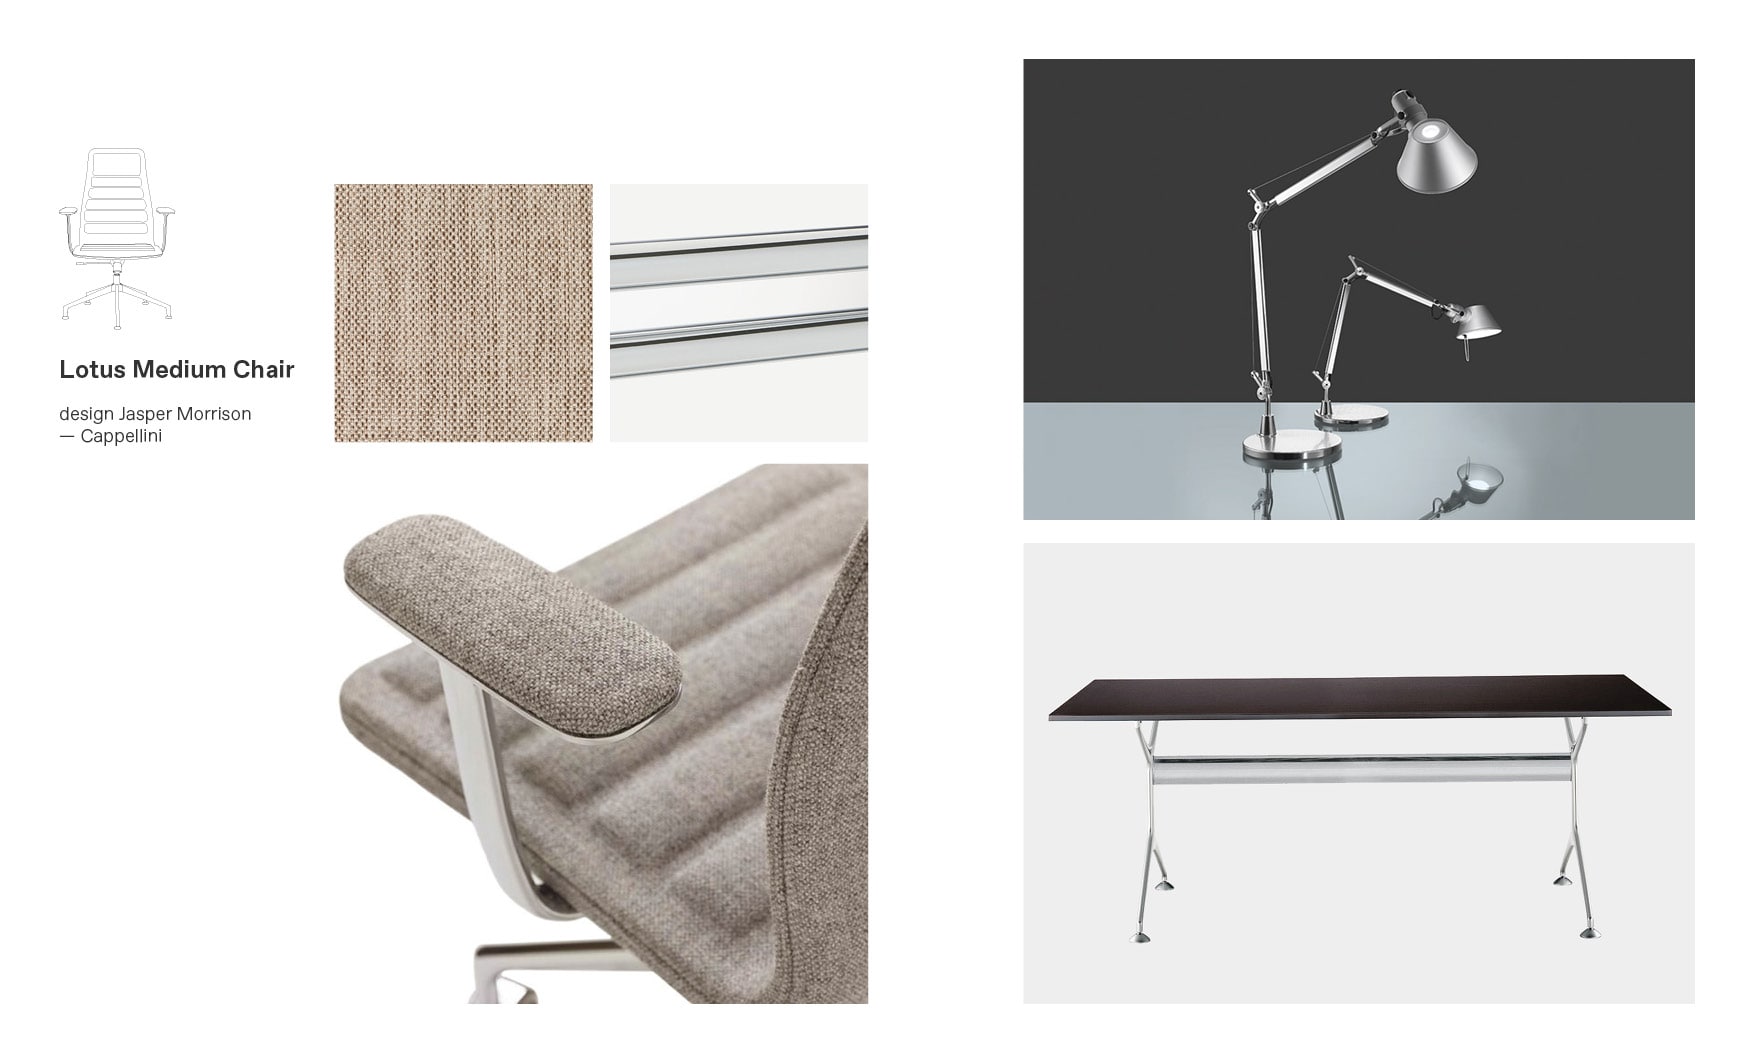 Cappellini chairs and Lotus Medium moodboard composition